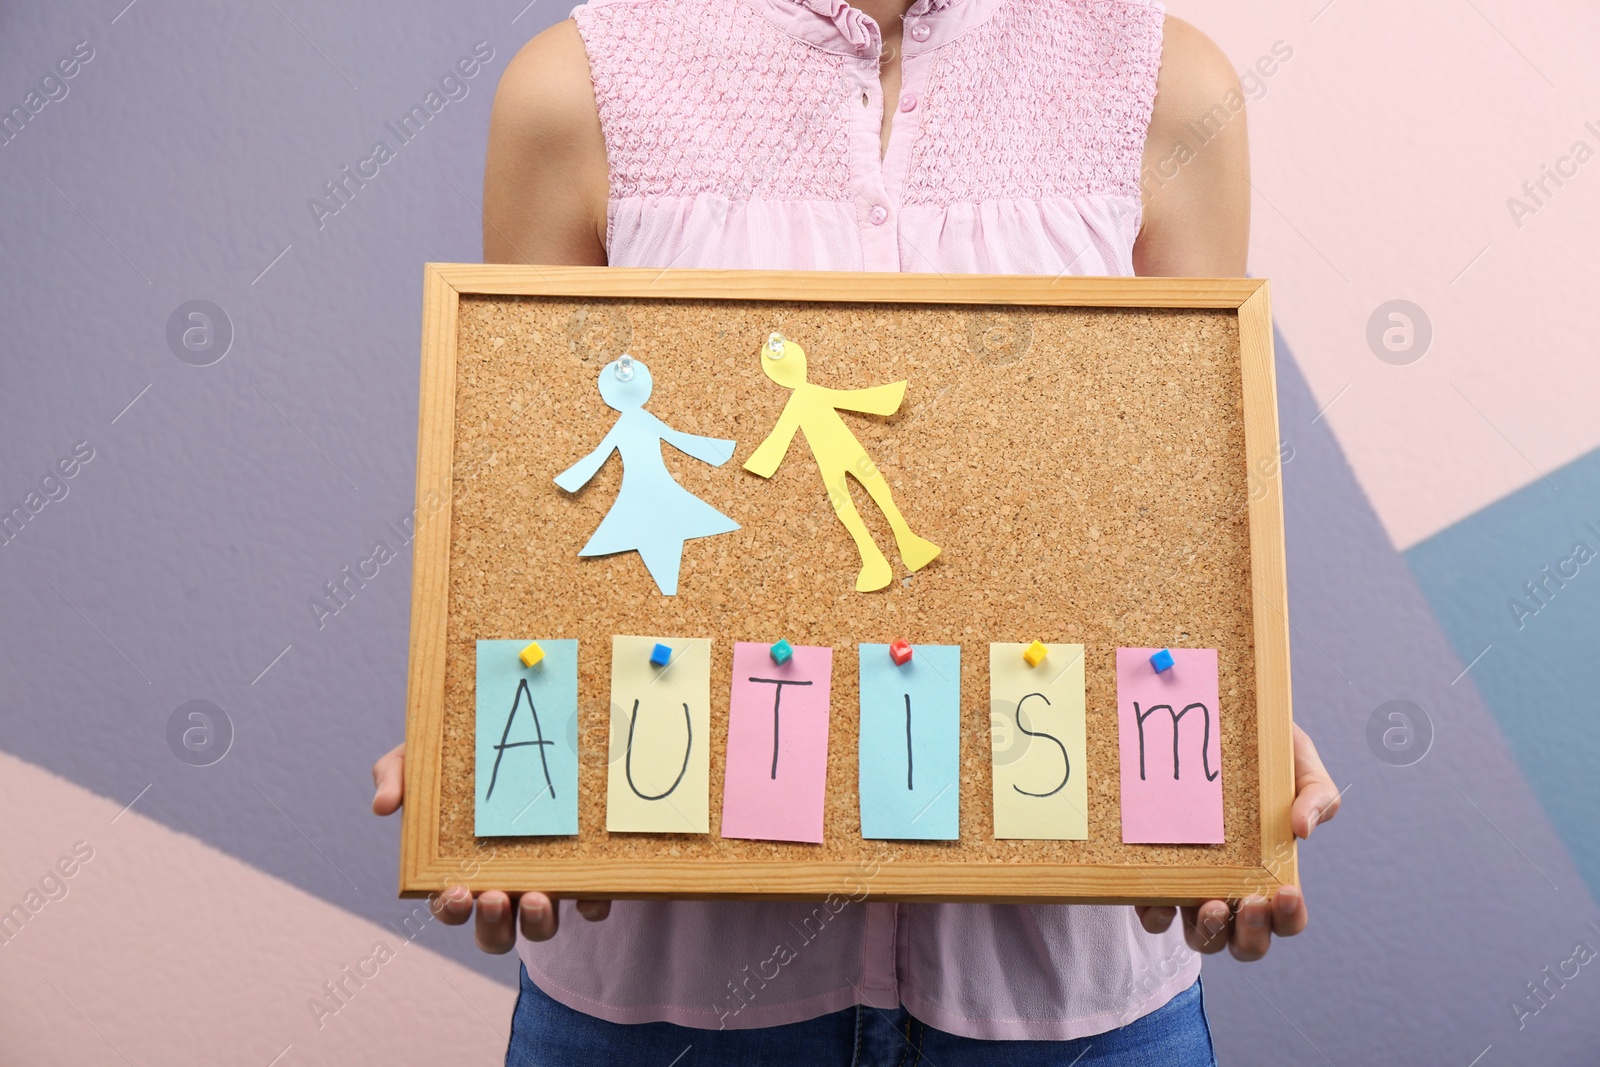 Photo of Woman holding board with word "Autism" on color background